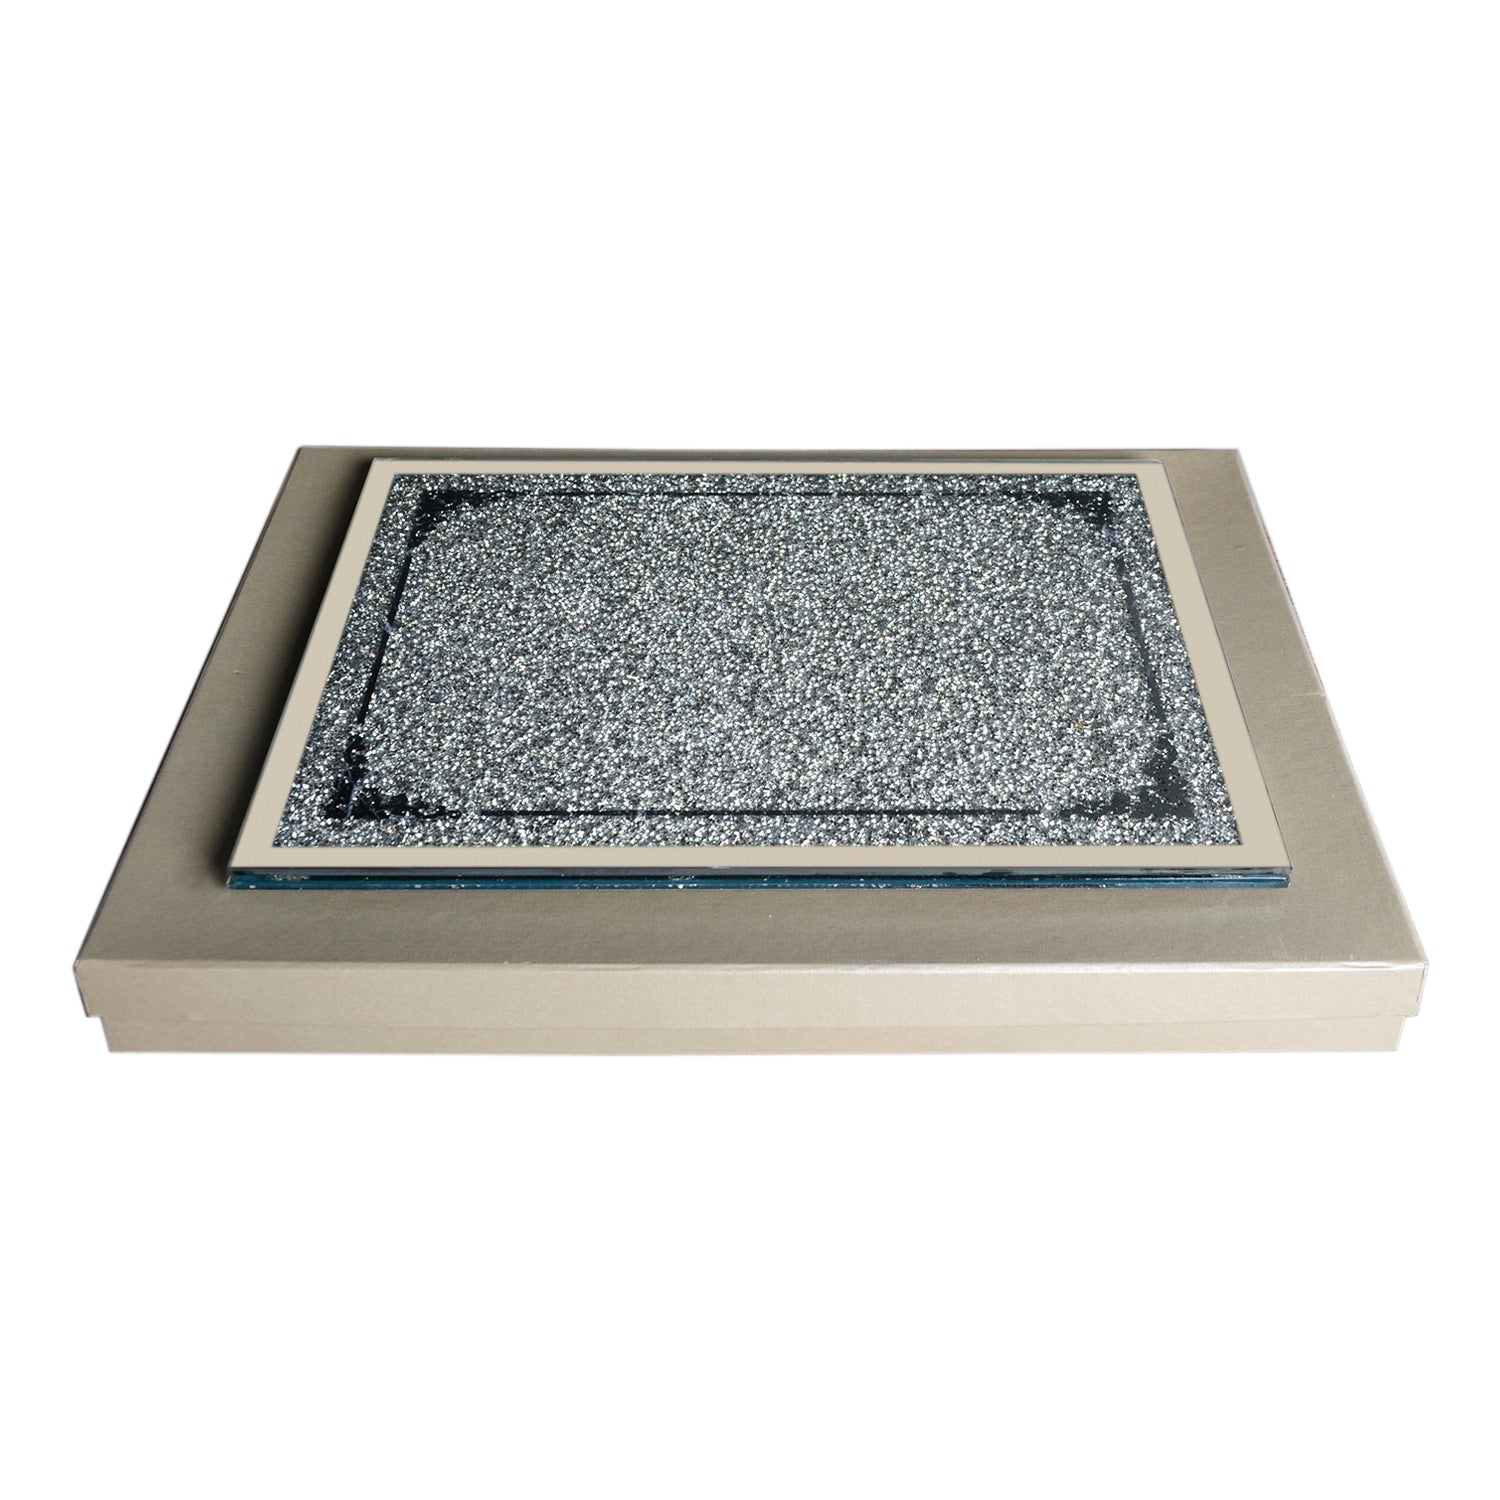 Ambrose Exquisite Glass Serving Tray in Gift Box silver-glass